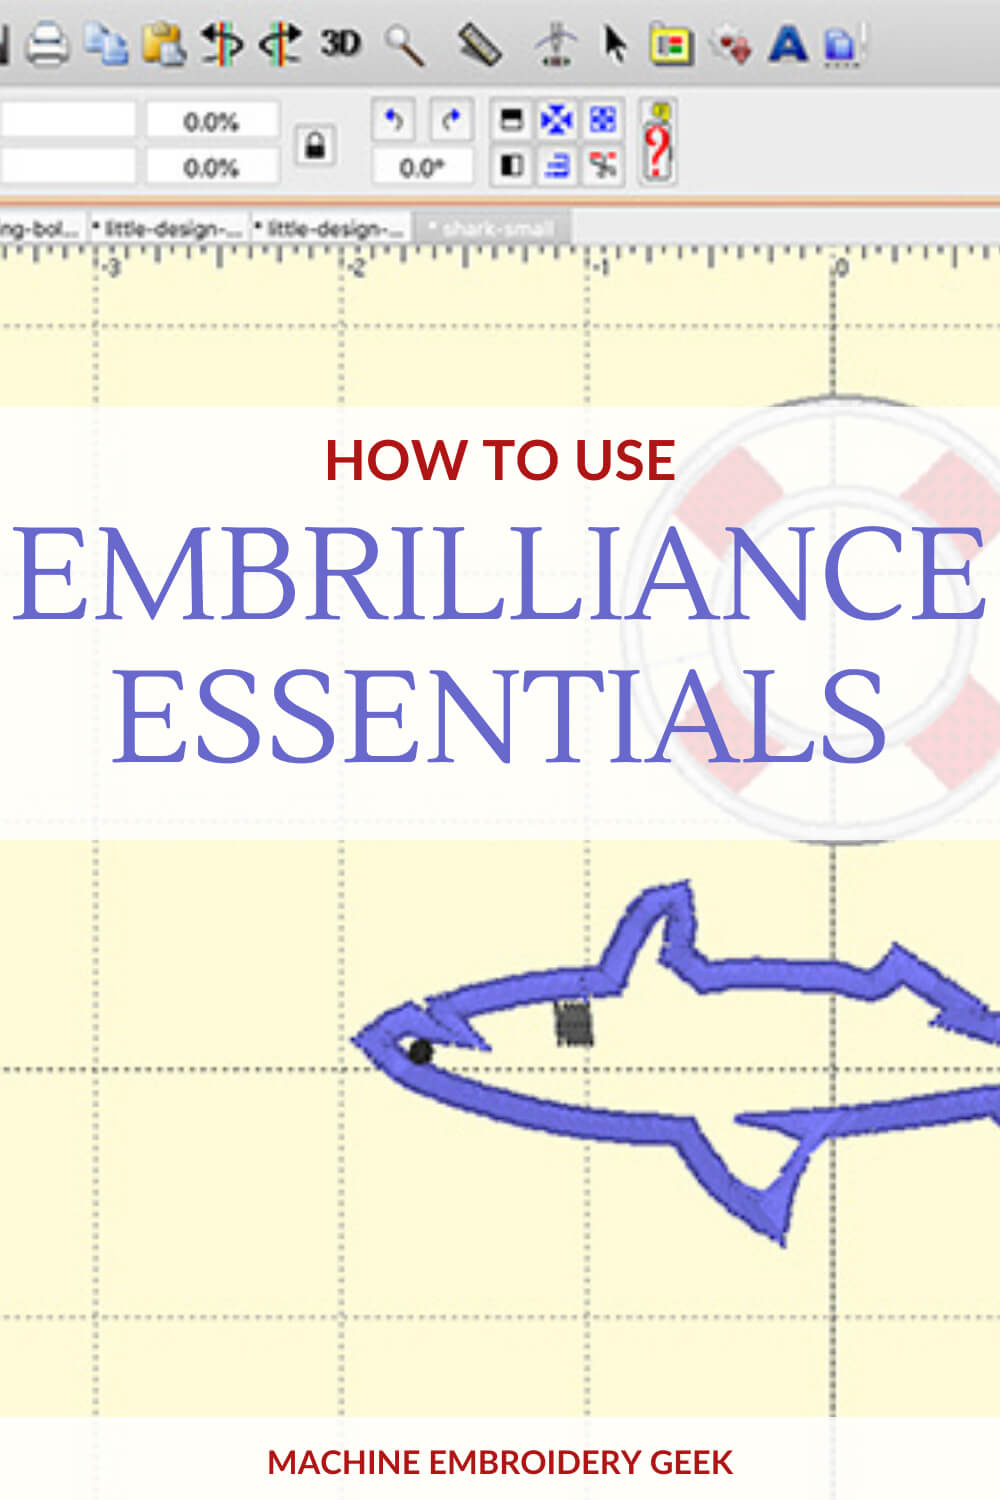 How to use Embrilliance Essentials